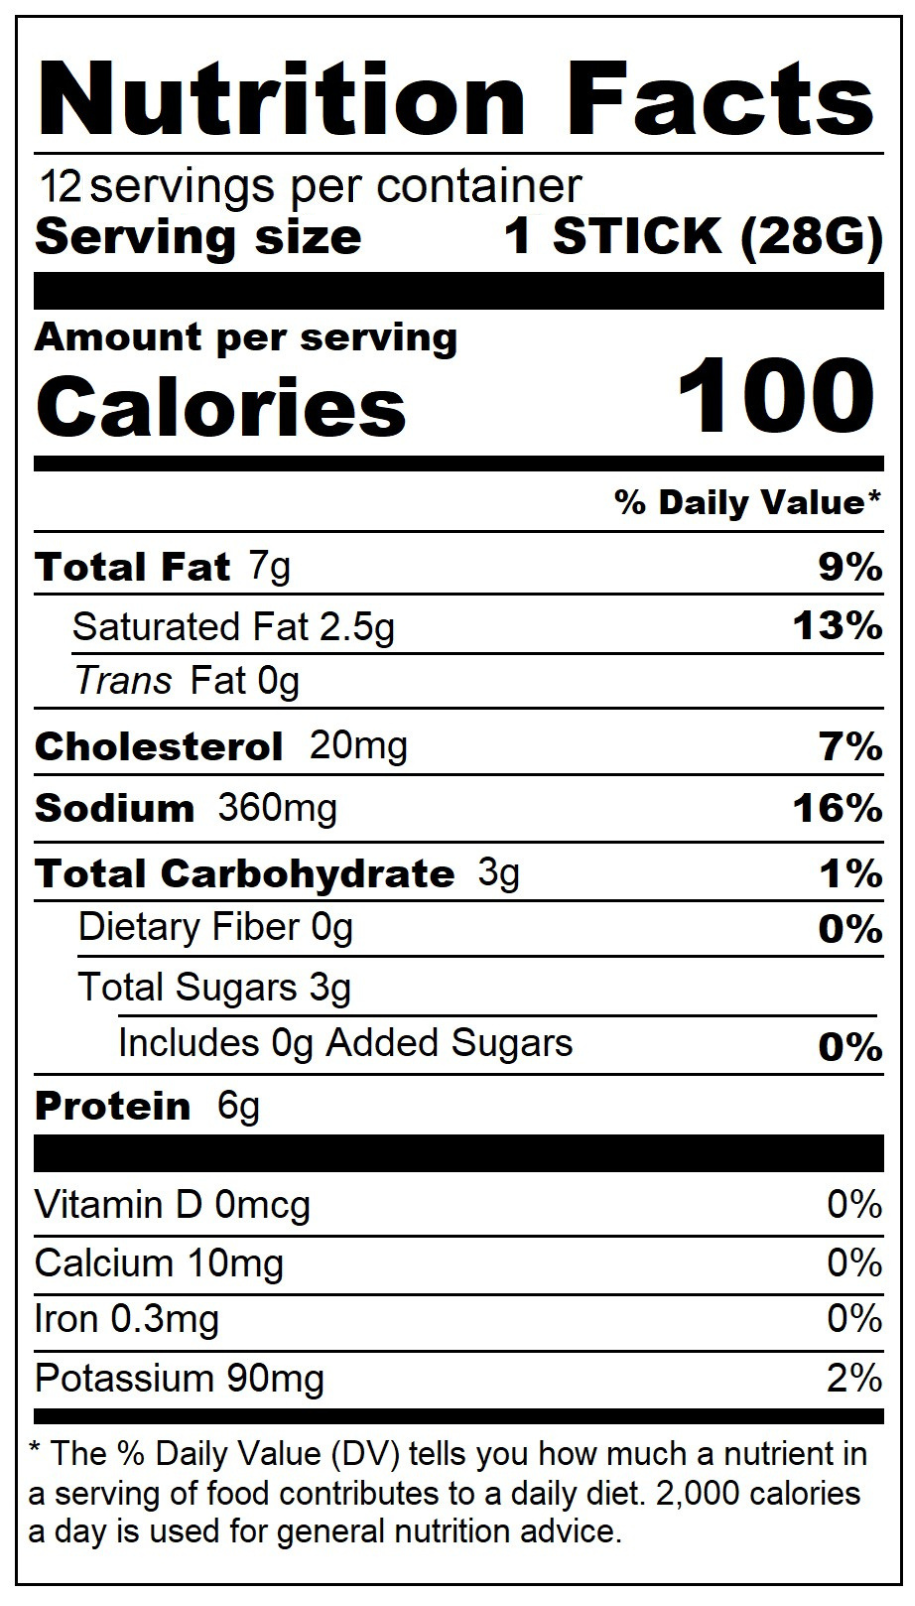 Nutrition Facts for Singing Pastures Pineapple Meat Sticks